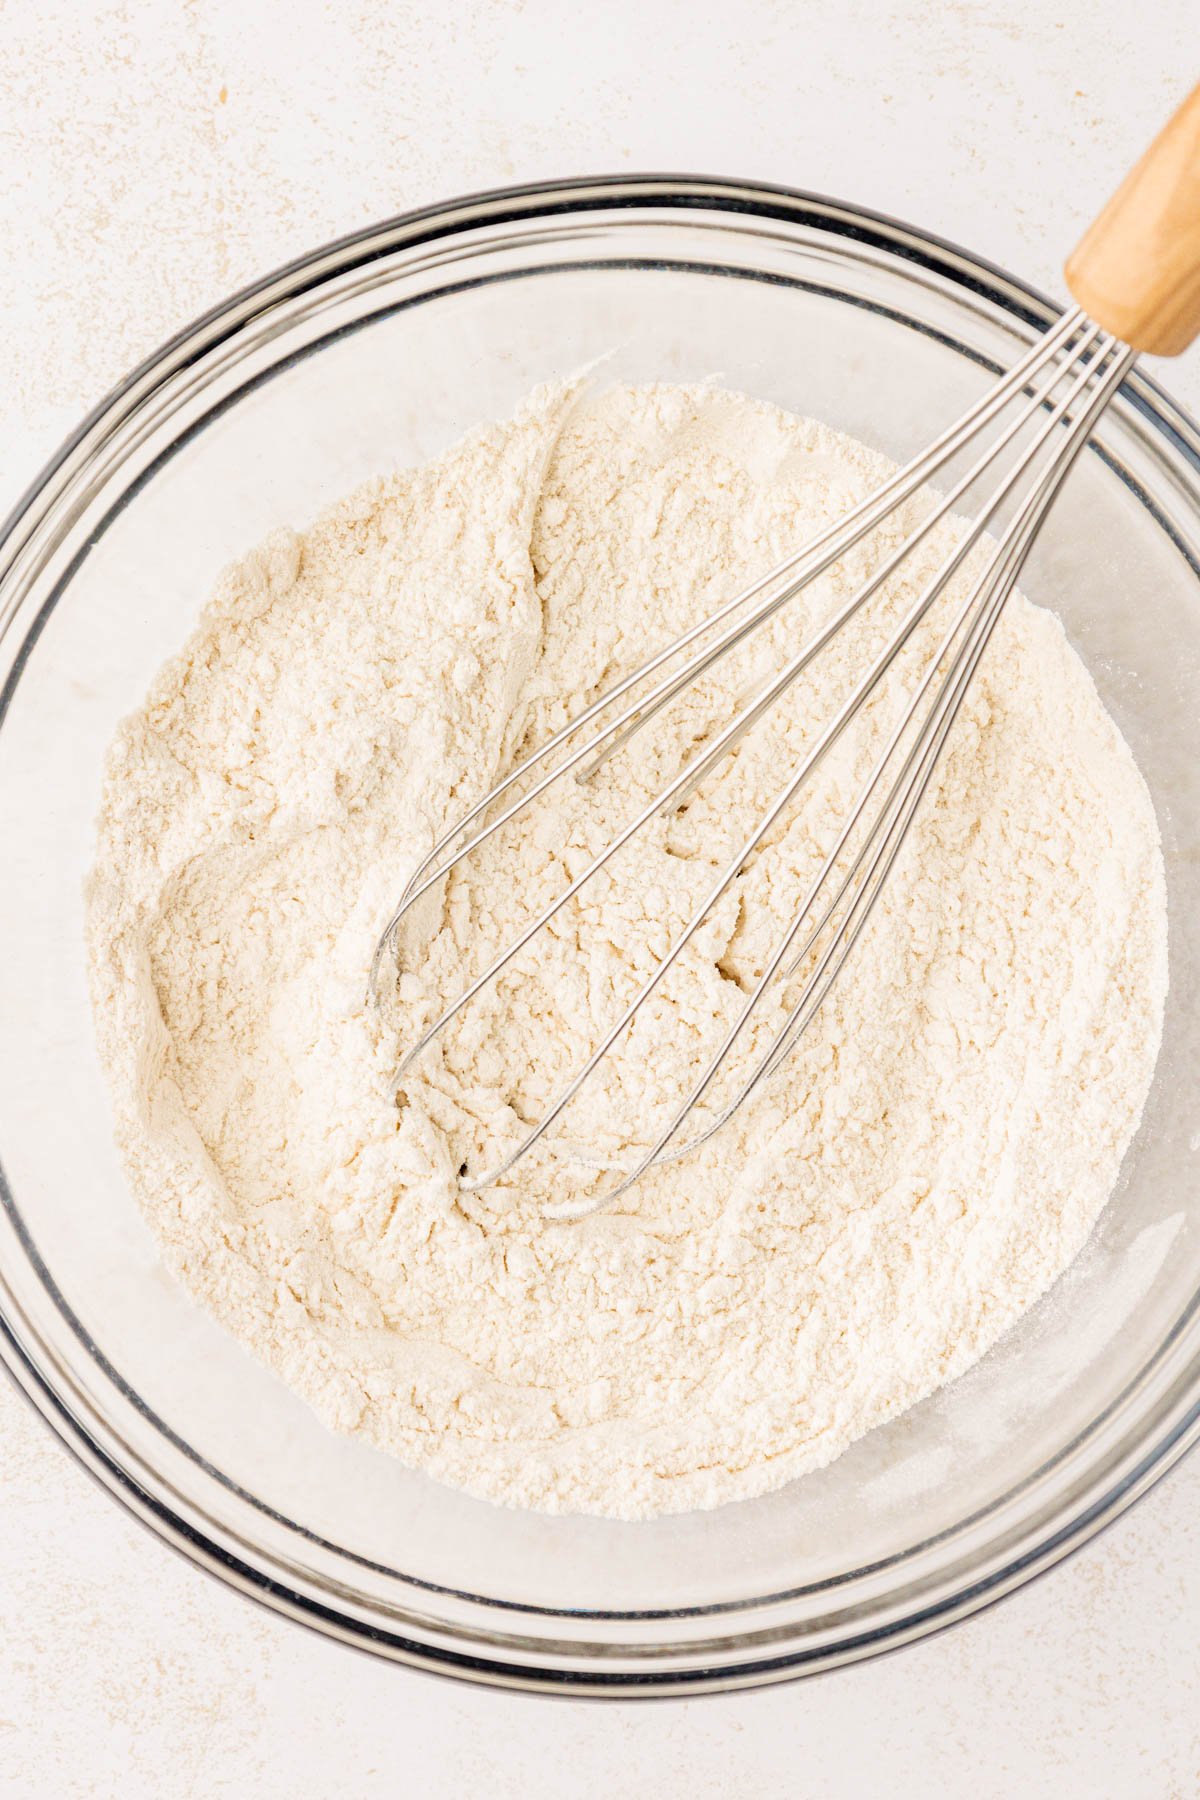 Dry ingredients whisked together in a glass bowl.